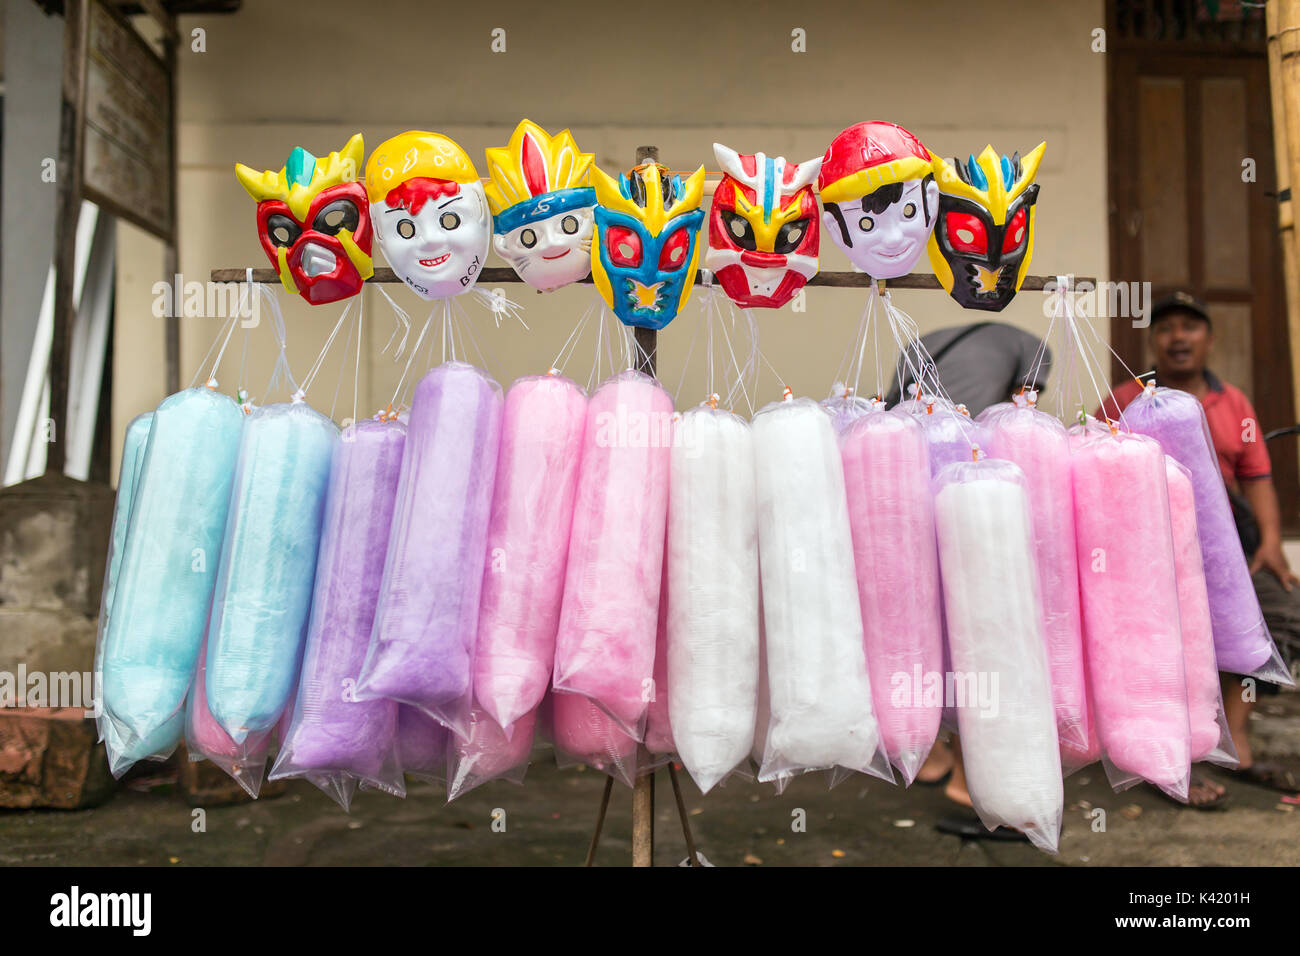 Cotton candy for sale on the street in Bali, Indonesia Stock Photo